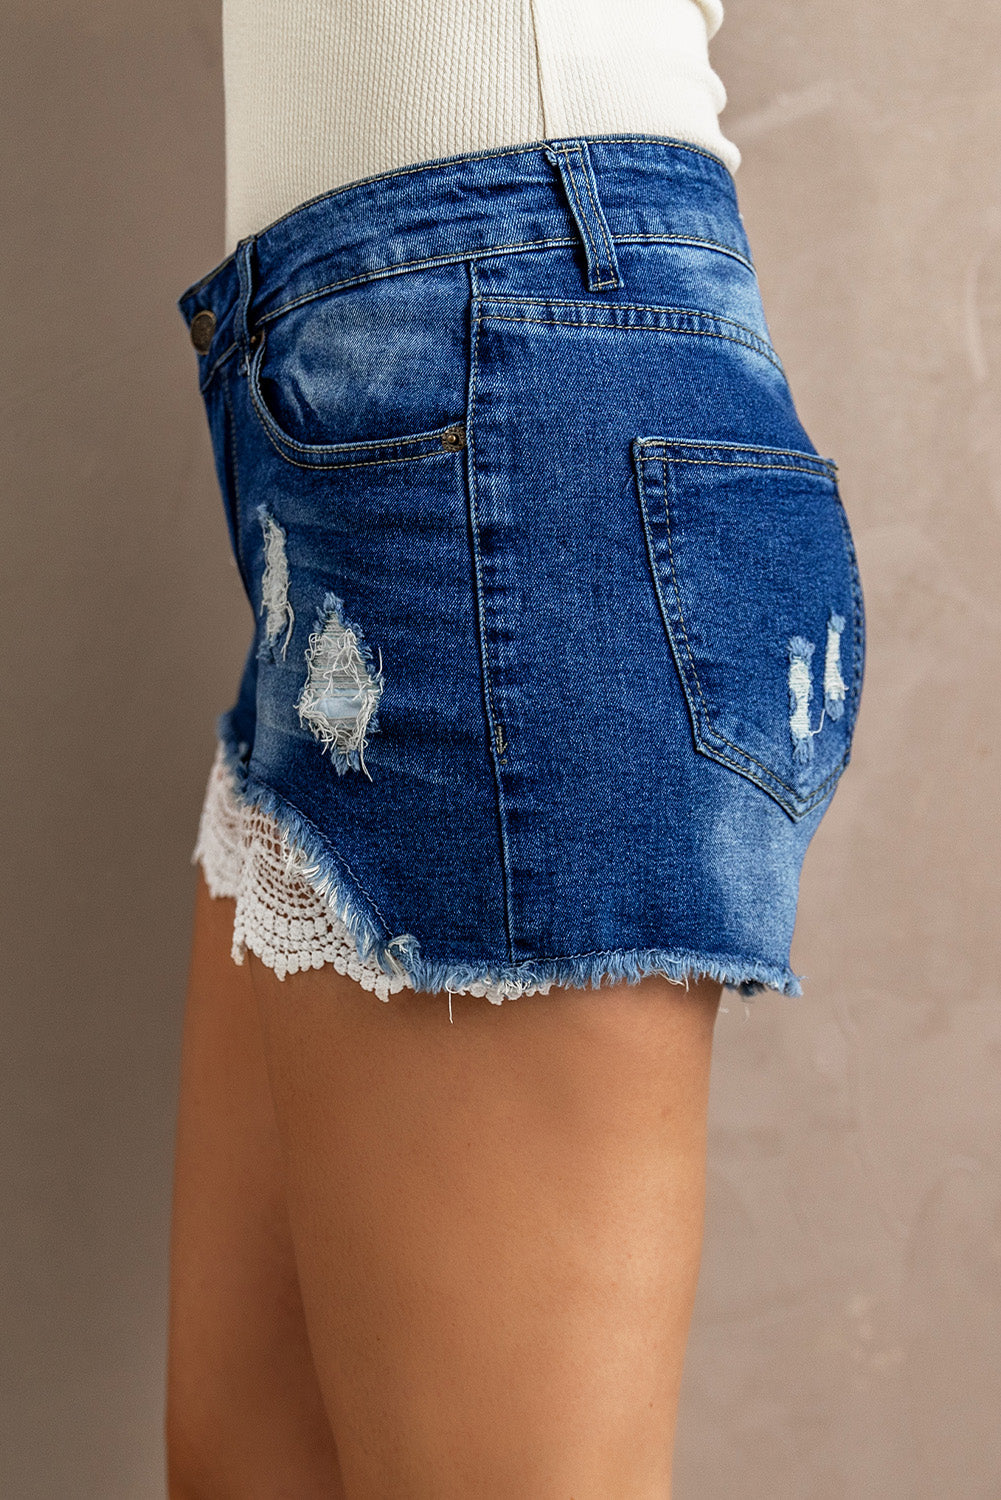 Discover the perfect blend of rugged charm and delicate femininity with our Spliced Lace Distressed Denim Shorts. Elevate your summer style!